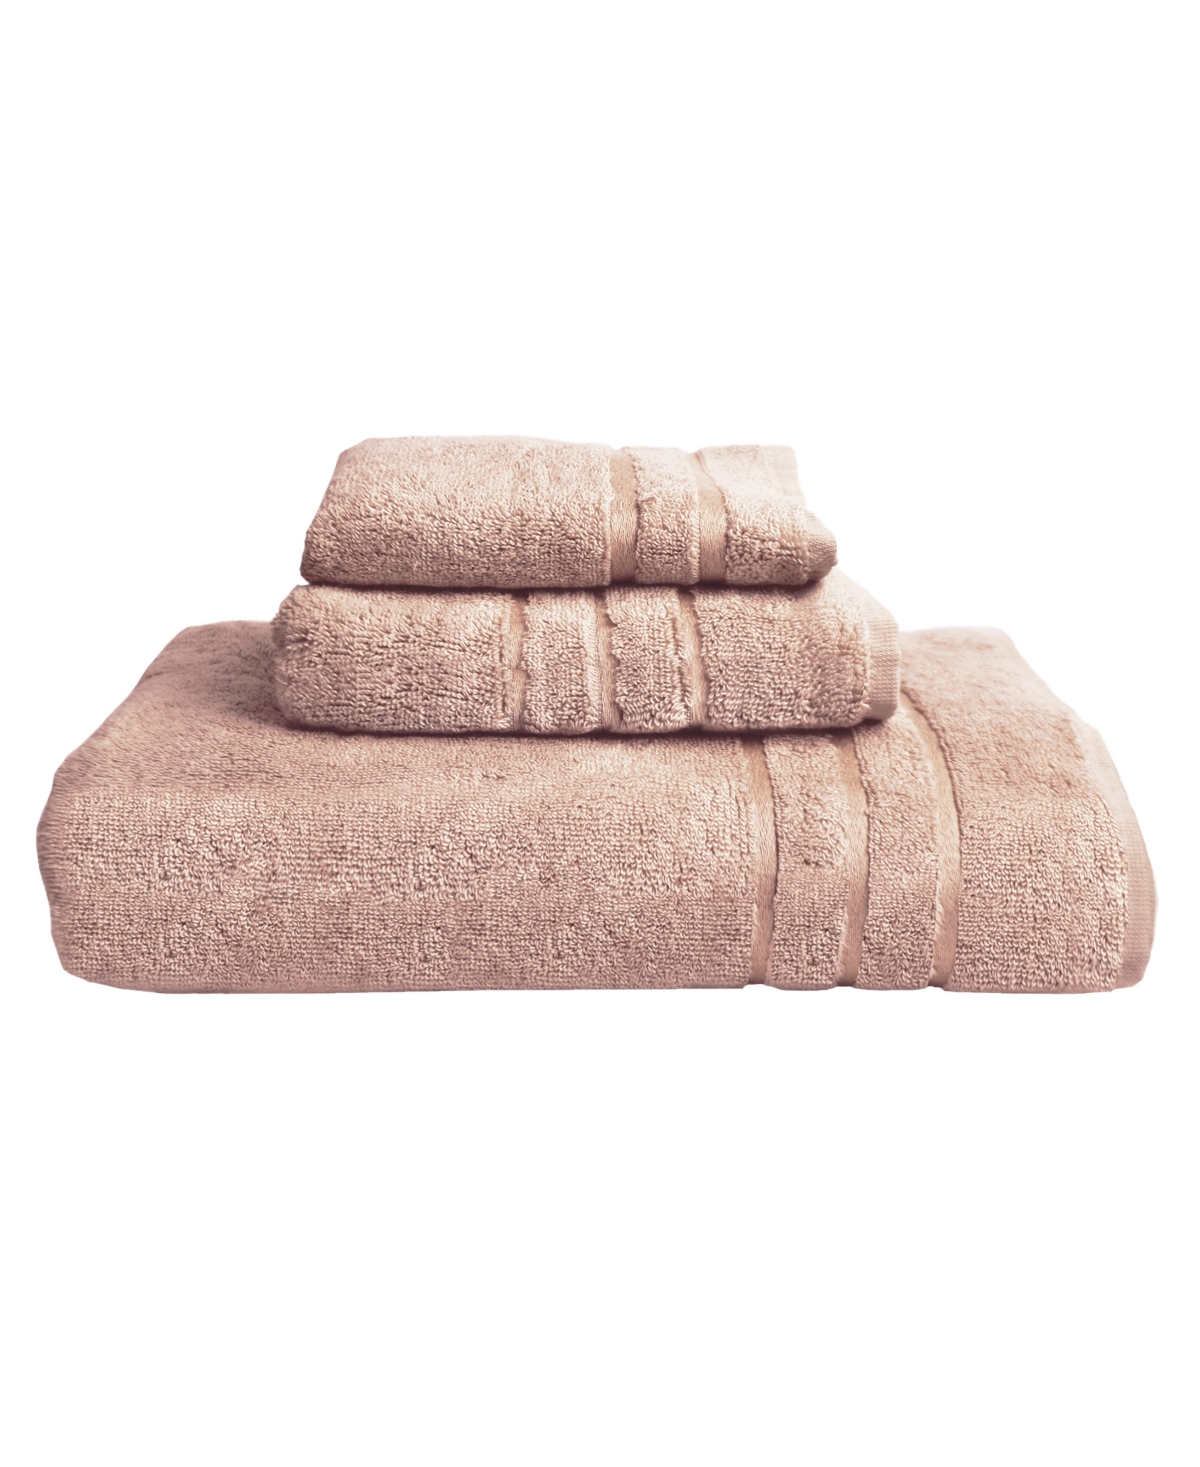 Cariloha 3-piece Viscose From Bamboo Towel Set In Blush